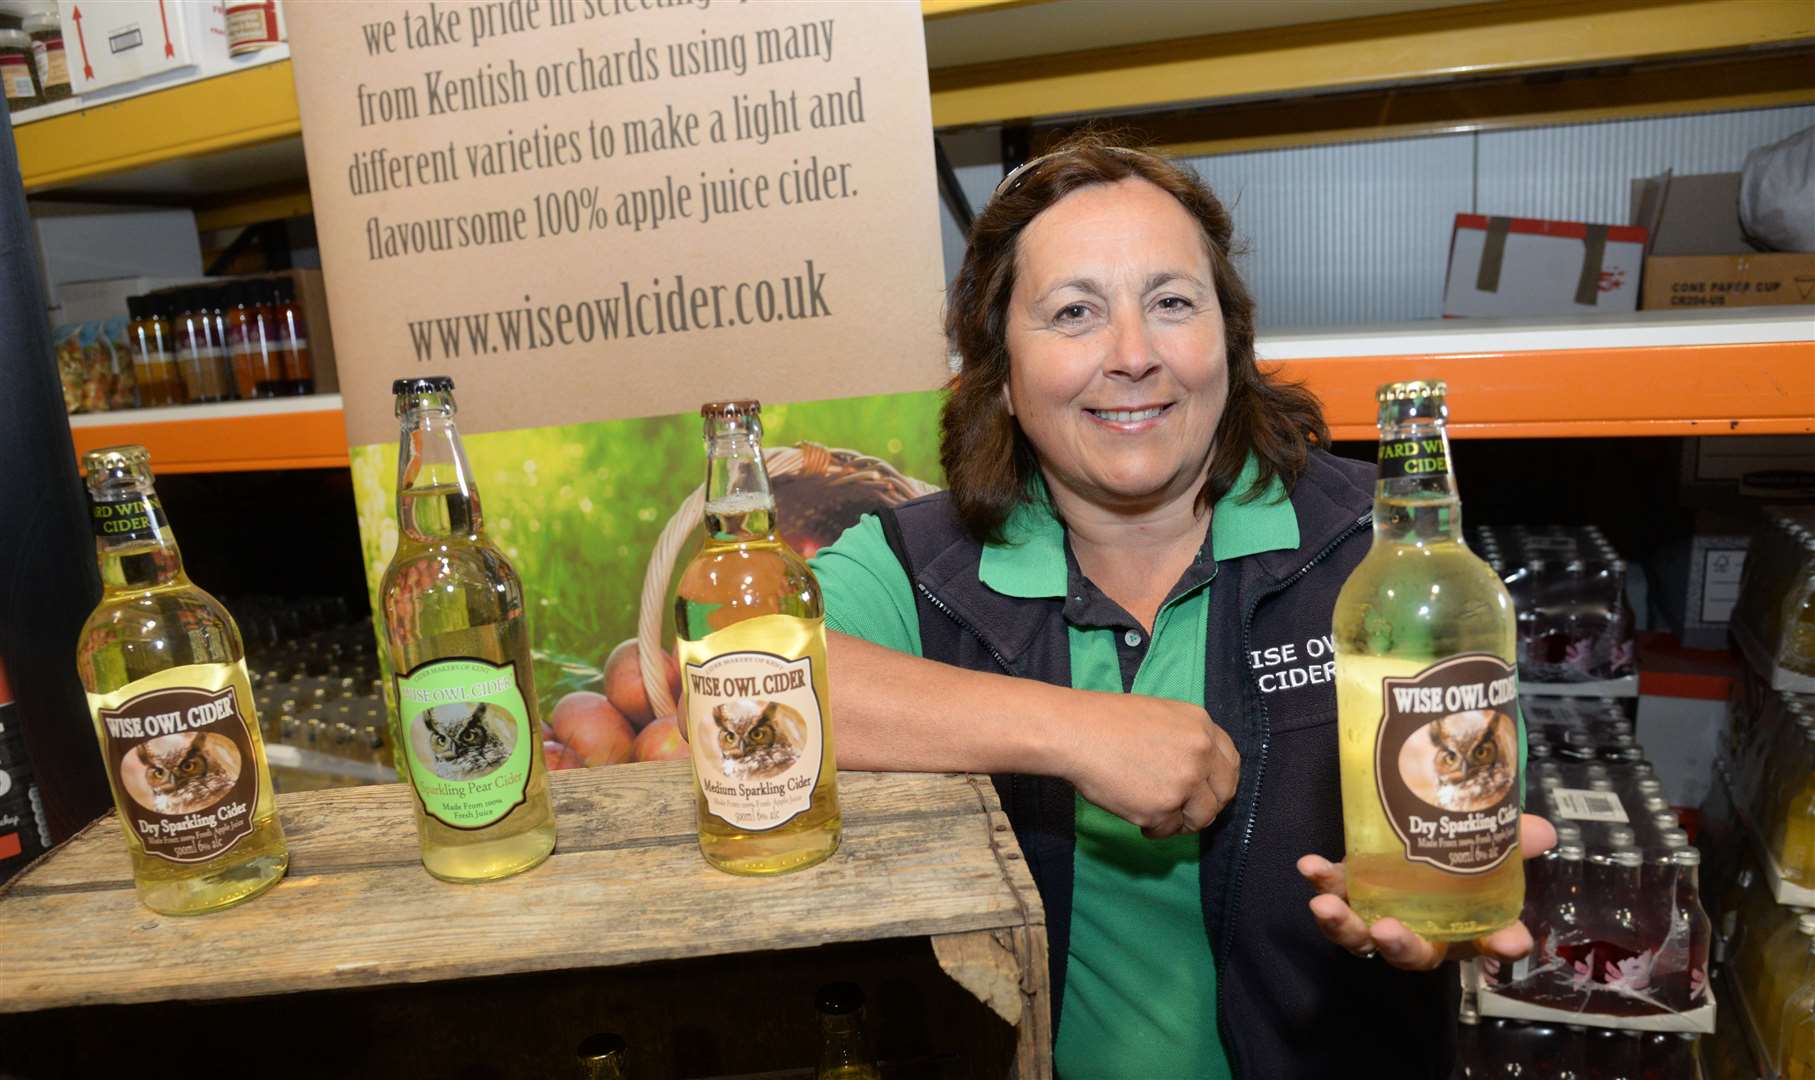 Paula Wise of Wise Owl Cider says the new app is helping to promote their product far and wide